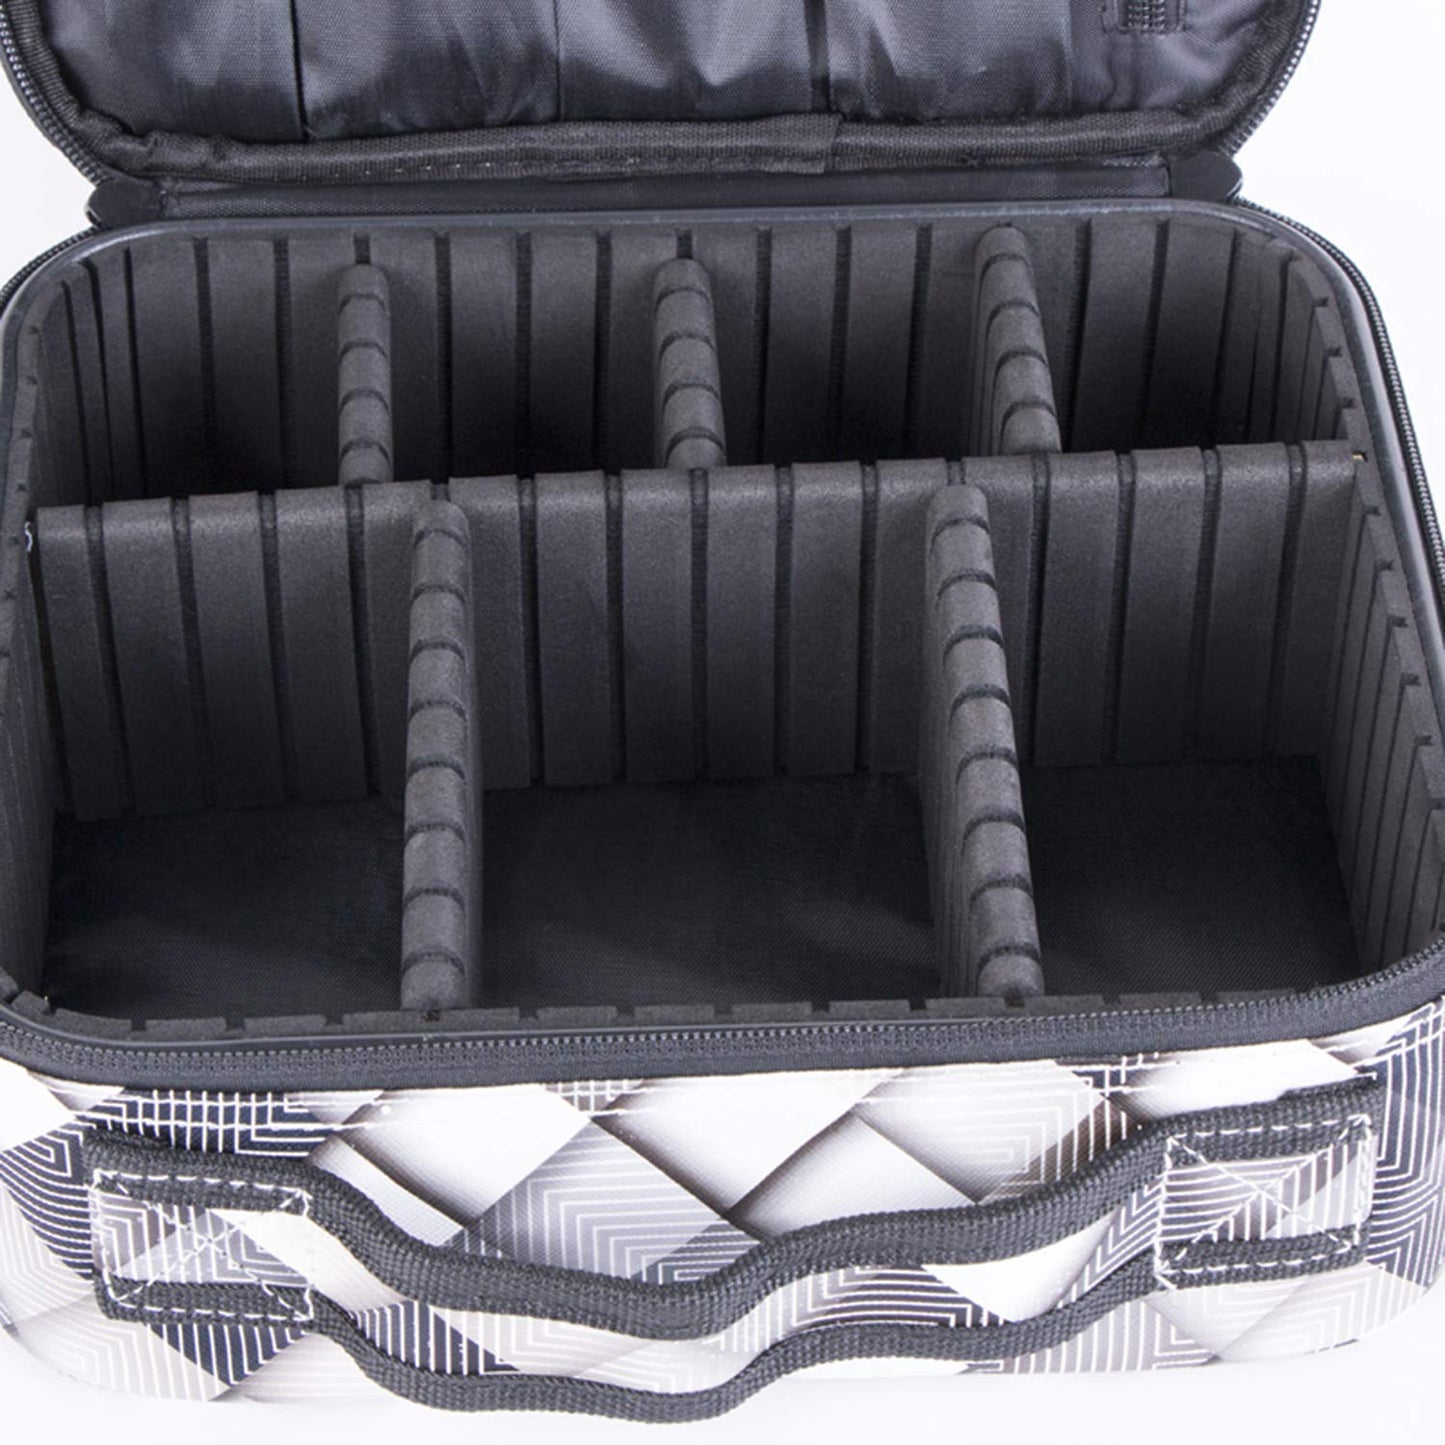 Cosmetic Storage Case with Adjustable Compartment (Grey Stripes)